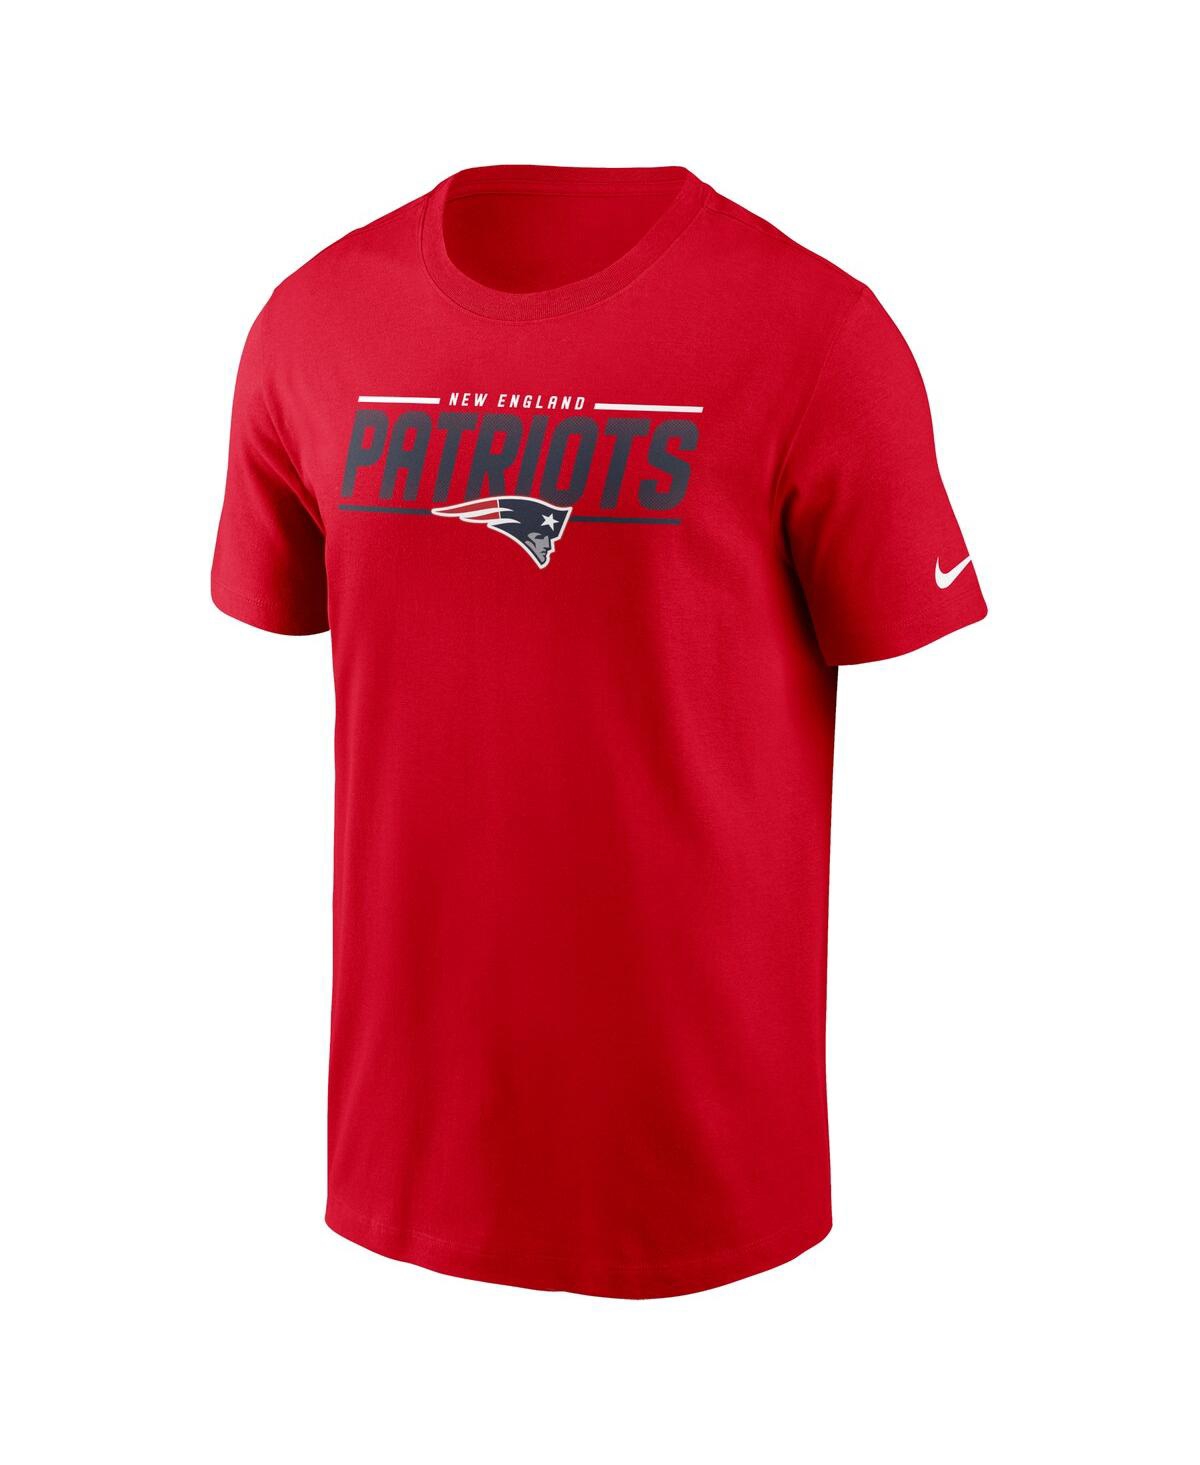 Shop Nike Men's  Red New England Patriots Muscle T-shirt